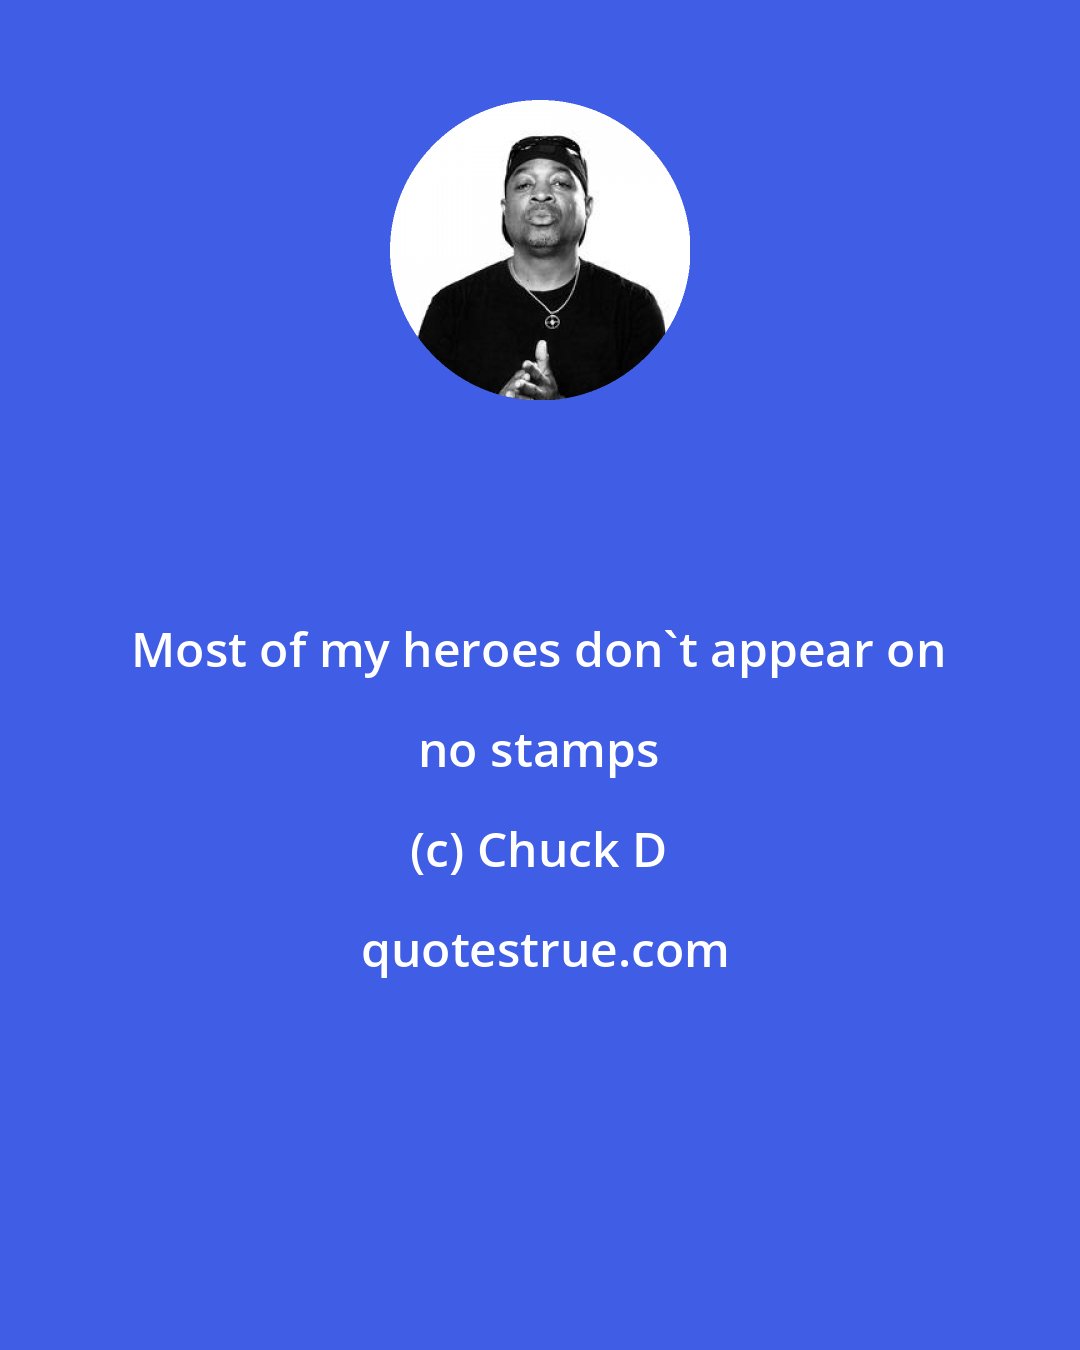 Chuck D: Most of my heroes don't appear on no stamps